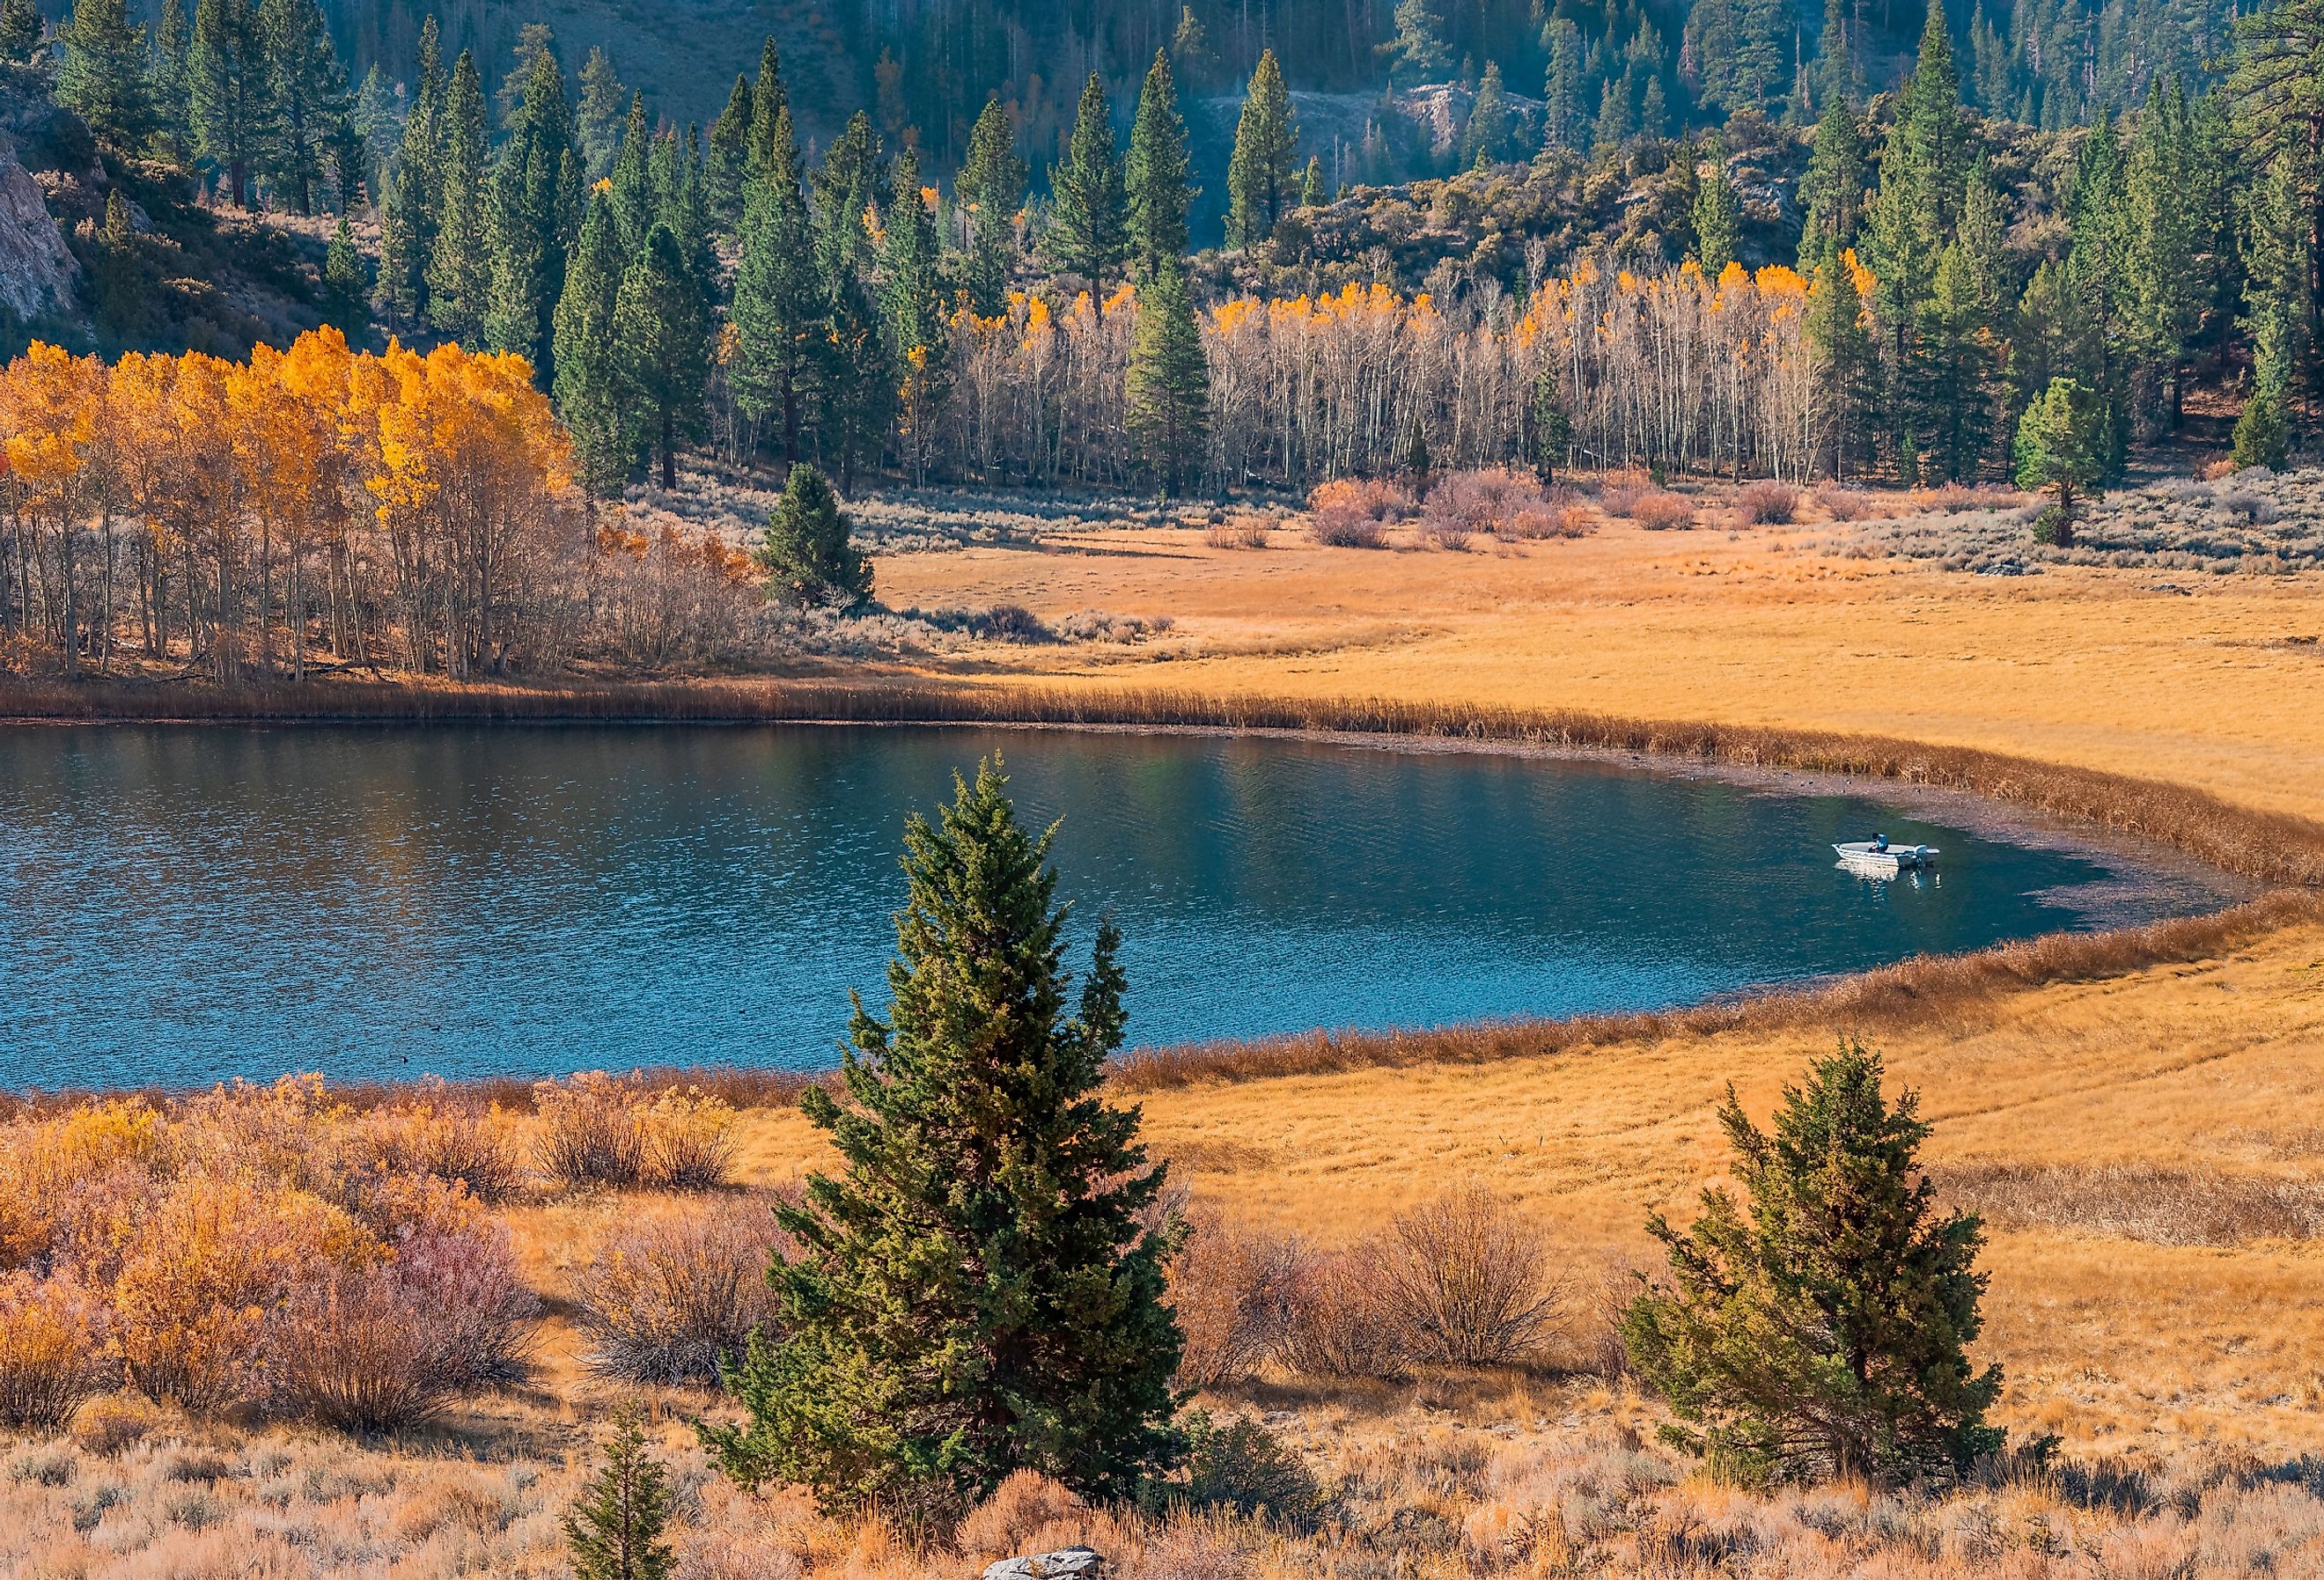 Fisherman floats on Gull Lake in the Autumn morning in the June Lake Loop of California. Image credit Patricia Elaine Thomas via Shutterstock.